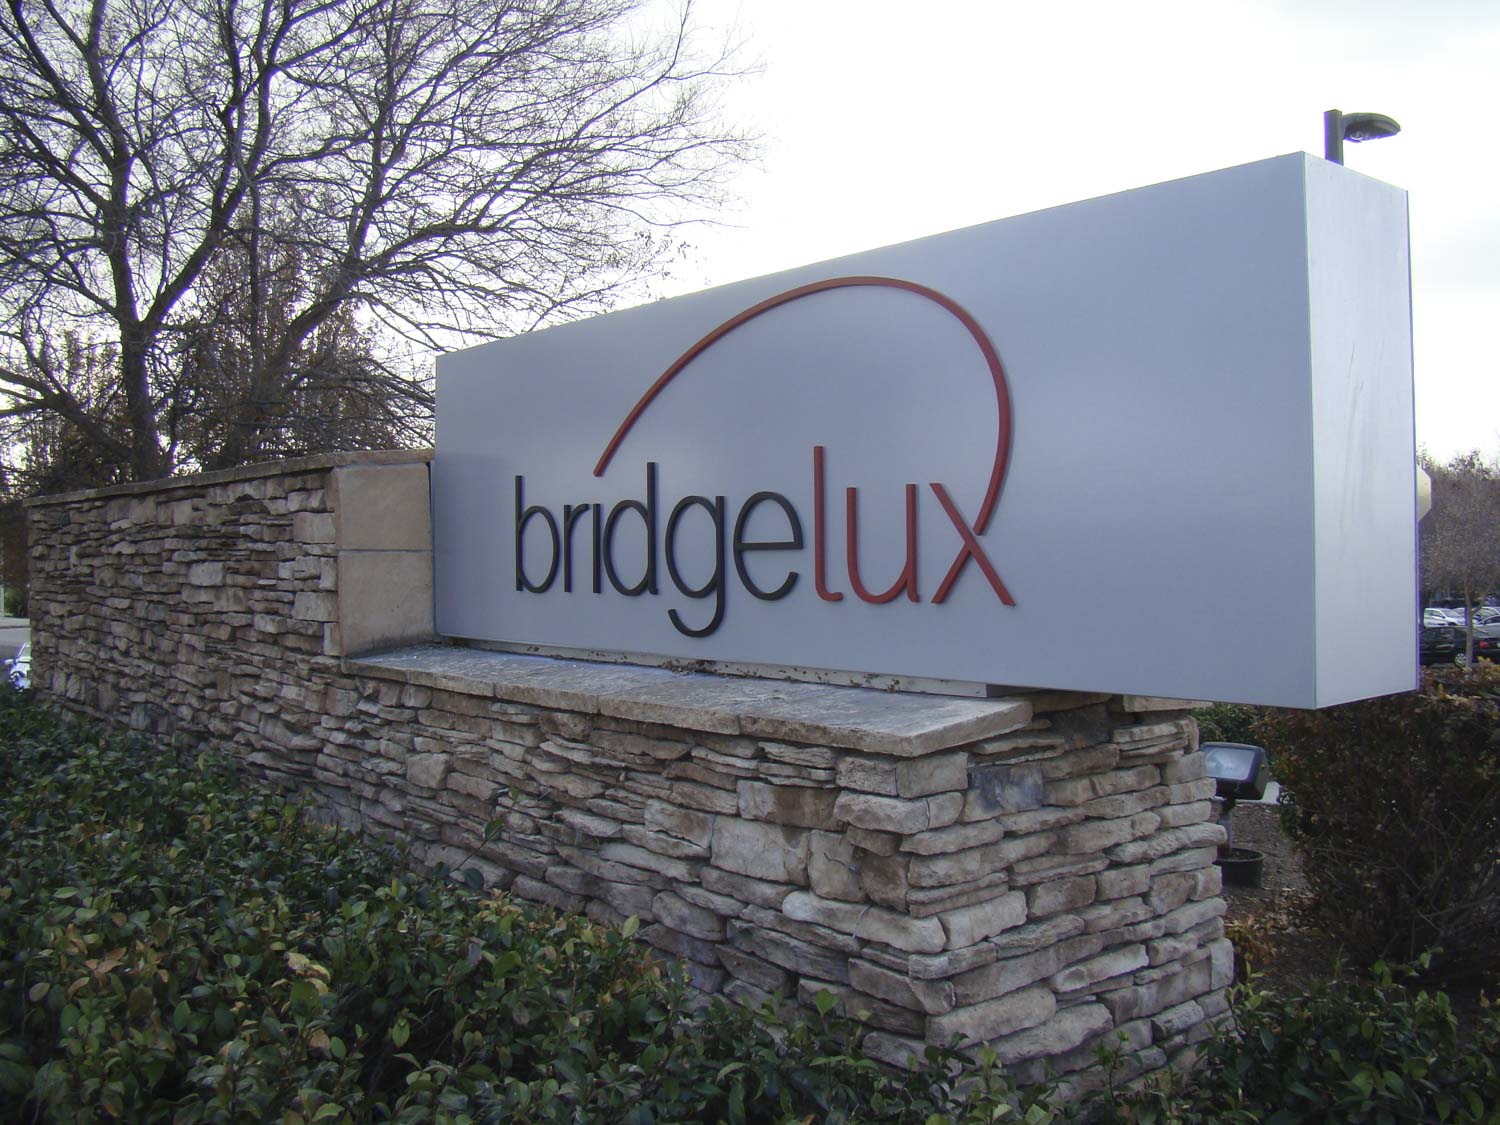 monument sign for Bridgelux in Livermore, CA made by Bennett Graphics in Pleasanton